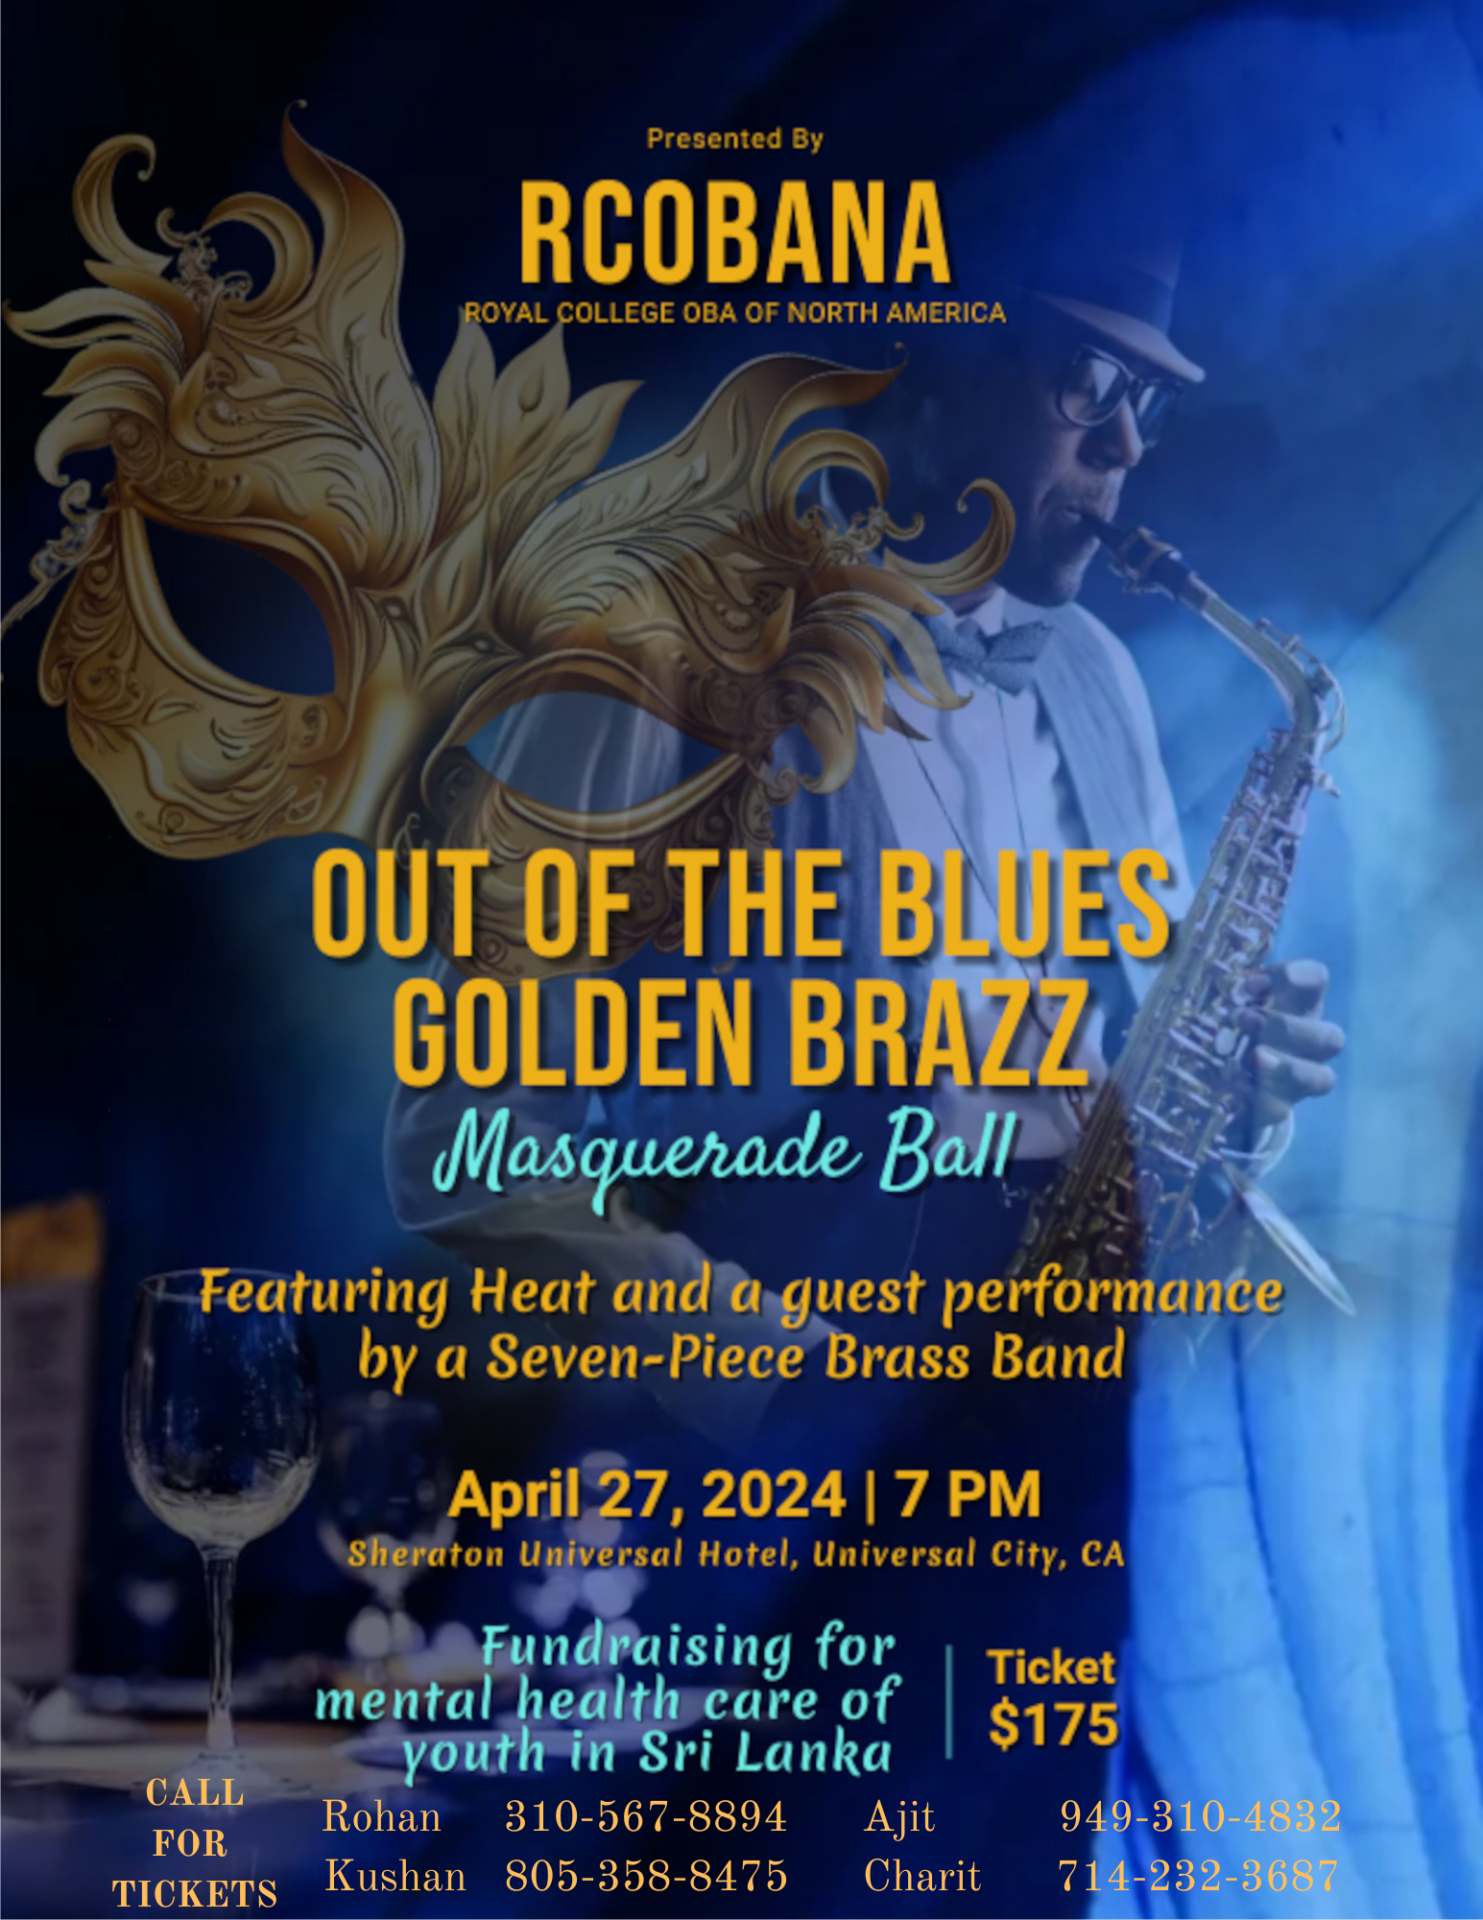 OUT OF THE BLUES GOLDEN BRAZZ Masquerade Ball